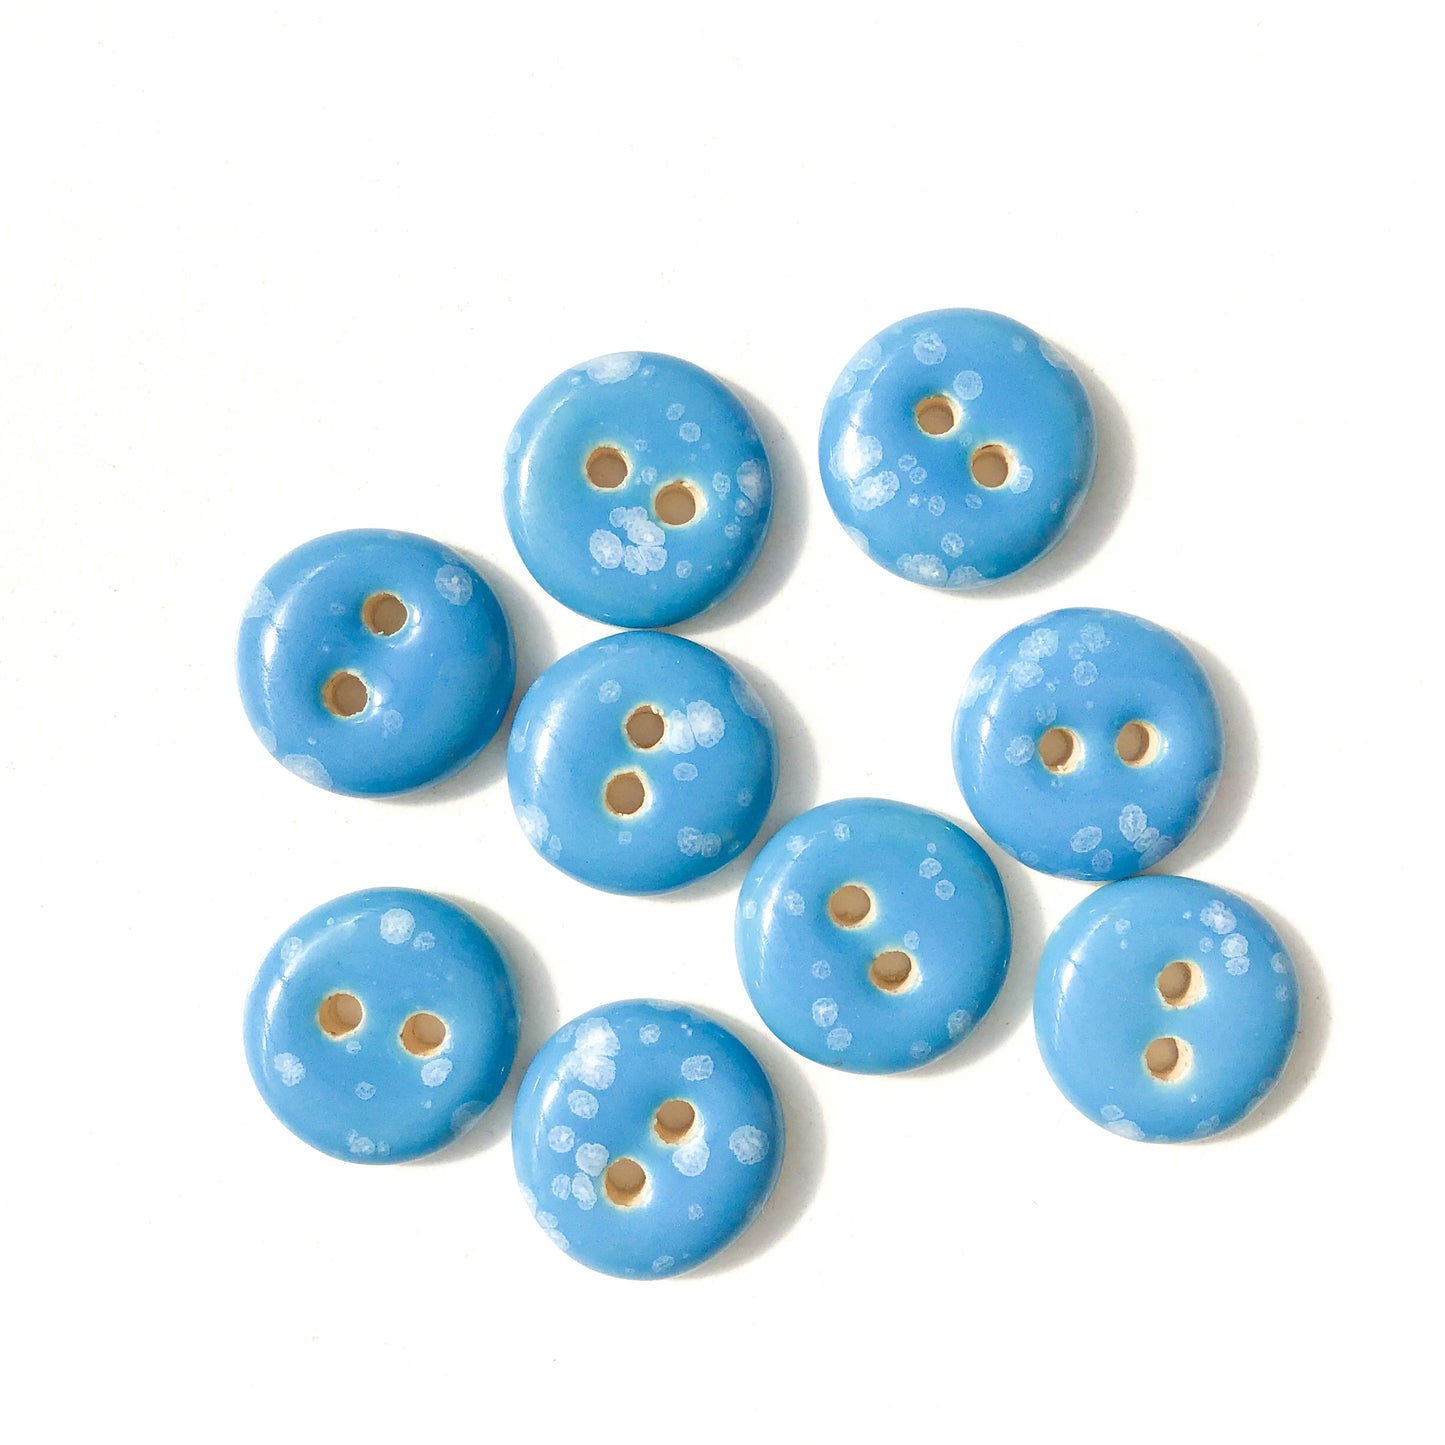 Speckled Blue Ceramic Buttons - Blue Clay Buttons - 9/16" - 9 Pack